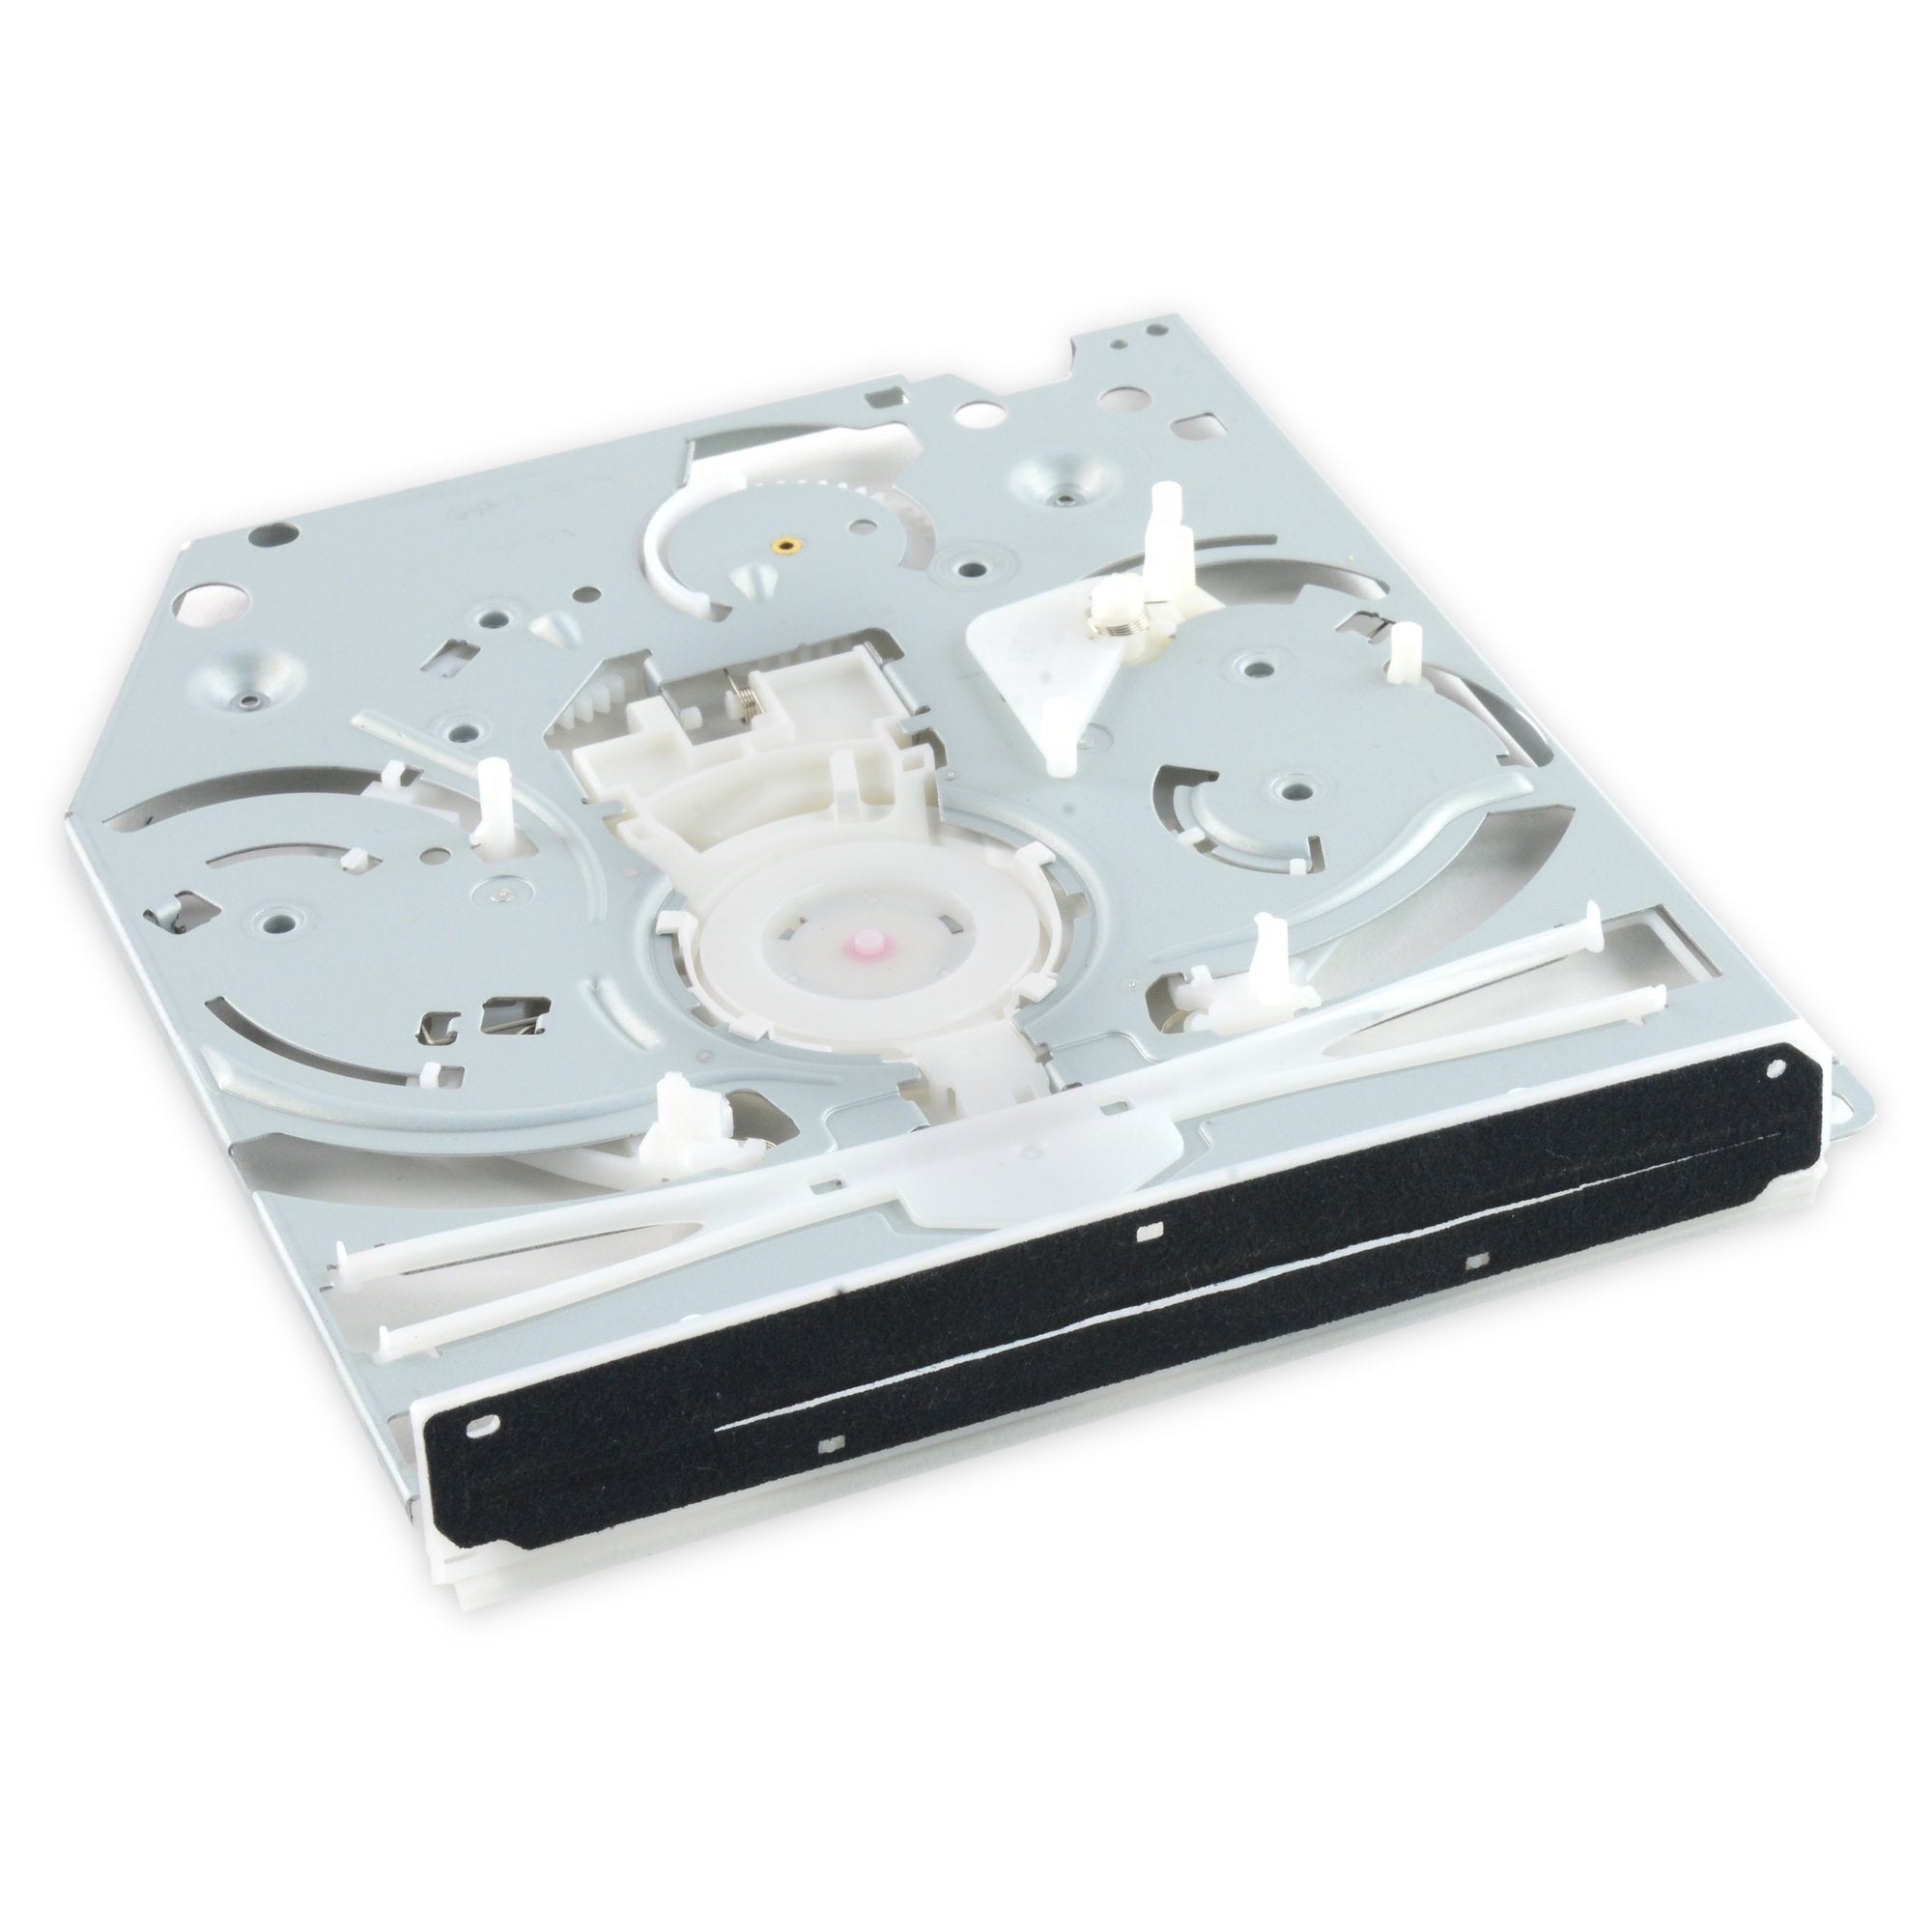 PlayStation 4 Optical Drive Ejection Plate